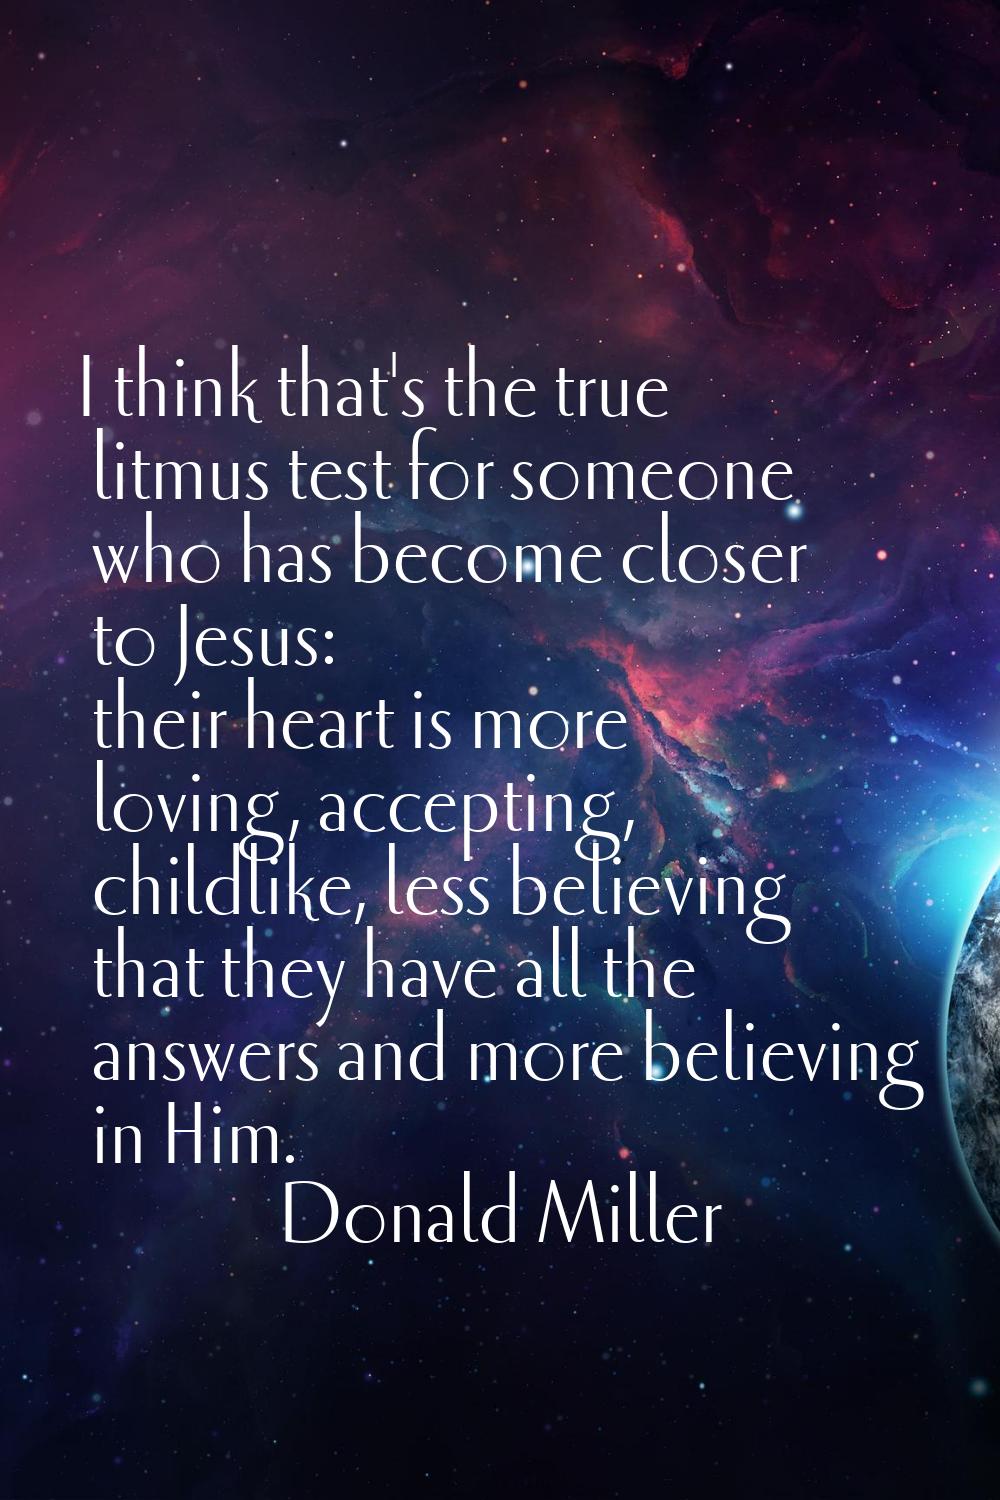 I think that's the true litmus test for someone who has become closer to Jesus: their heart is more